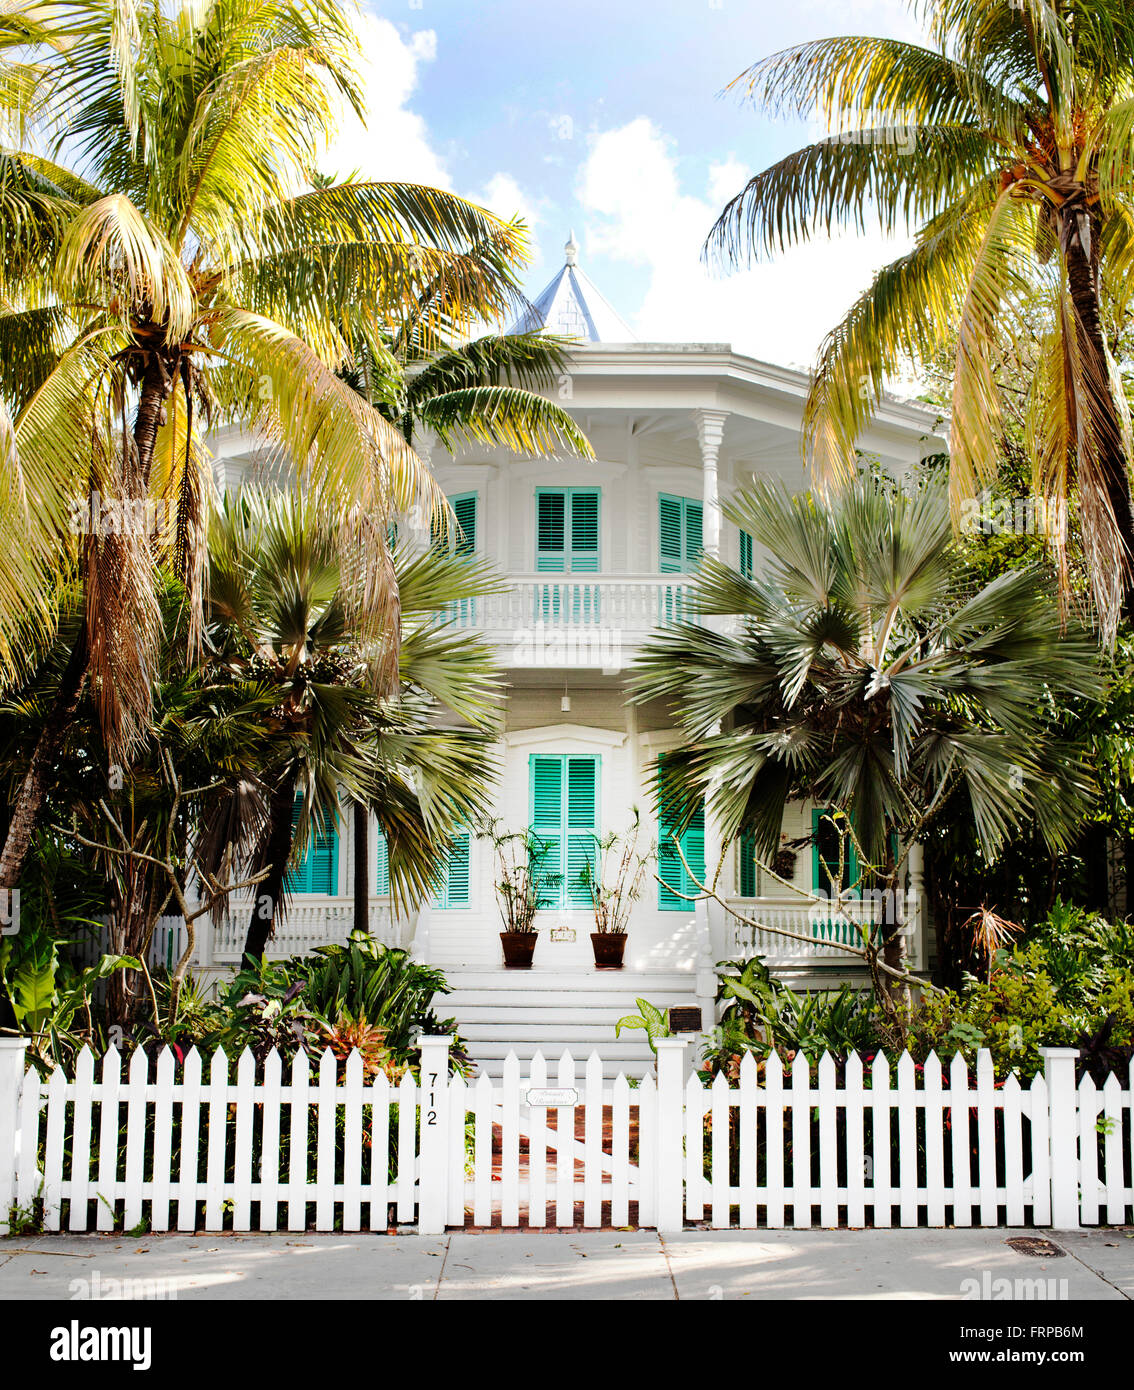 Key West, Florida, USA. A stately white and teal two-story house behind a  picket fence and bordered by palm trees Stock Photo - Alamy